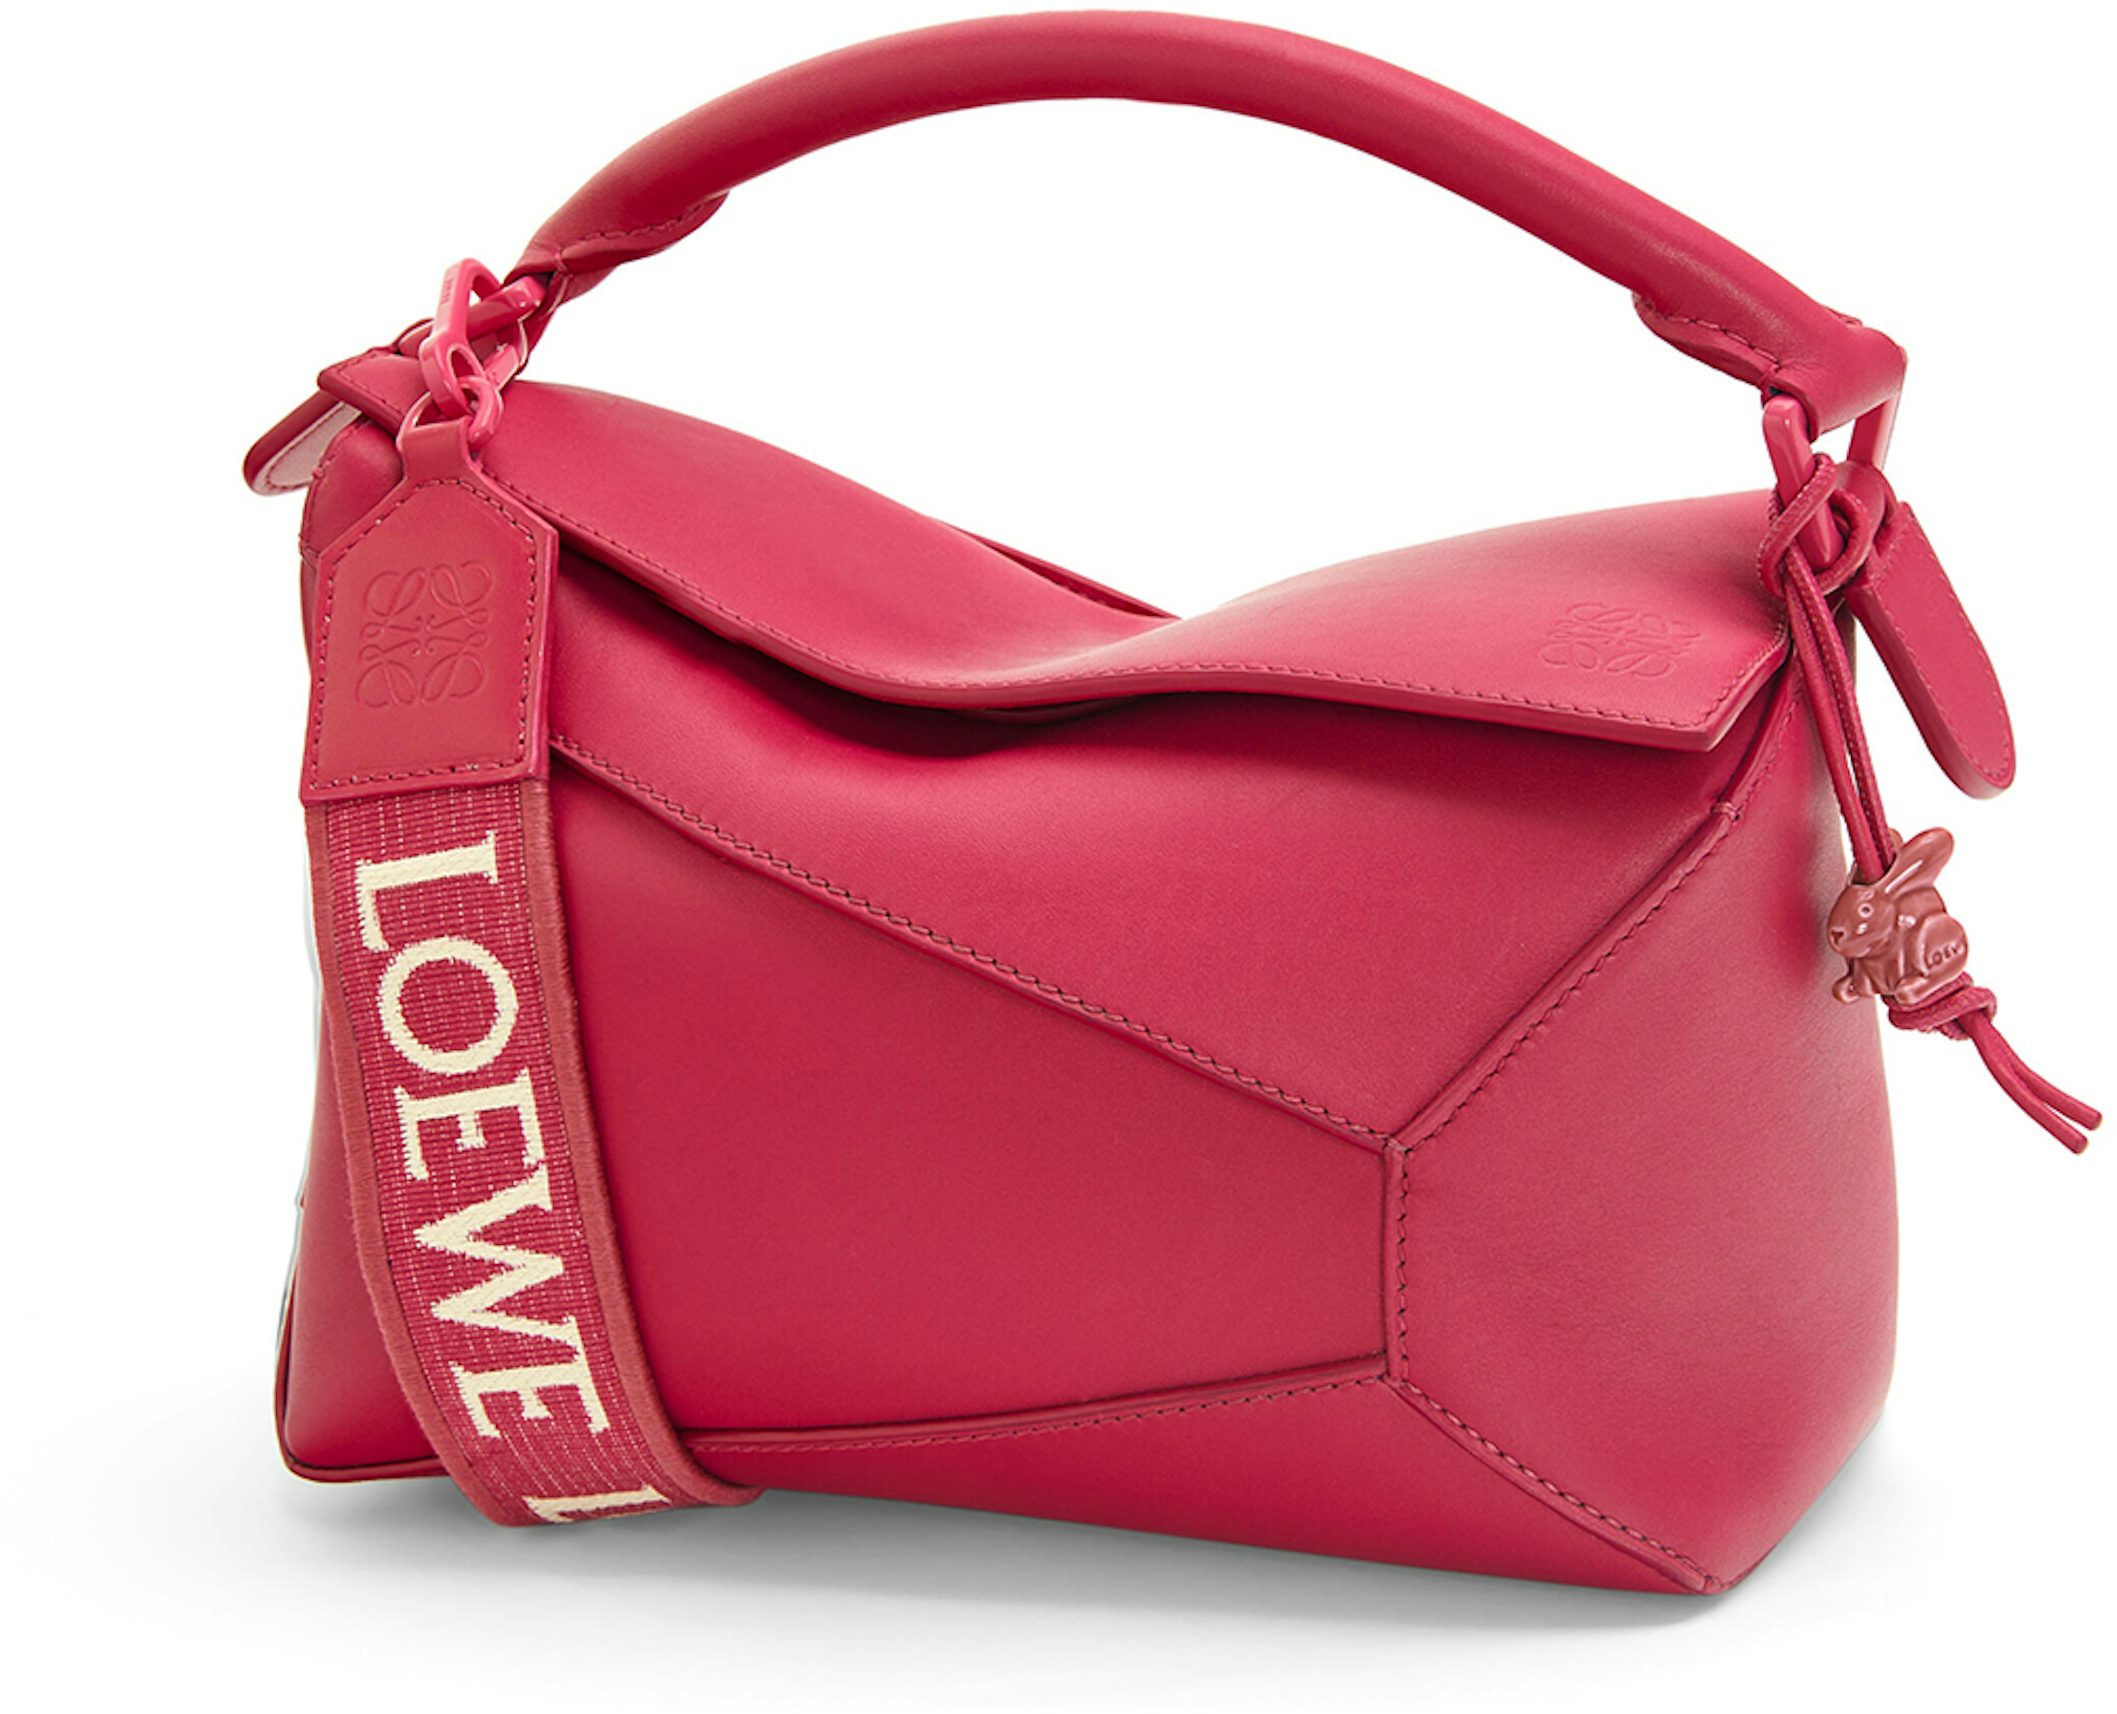 Loewe Women's Small Puzzle Leather Bag - Dusty Pink